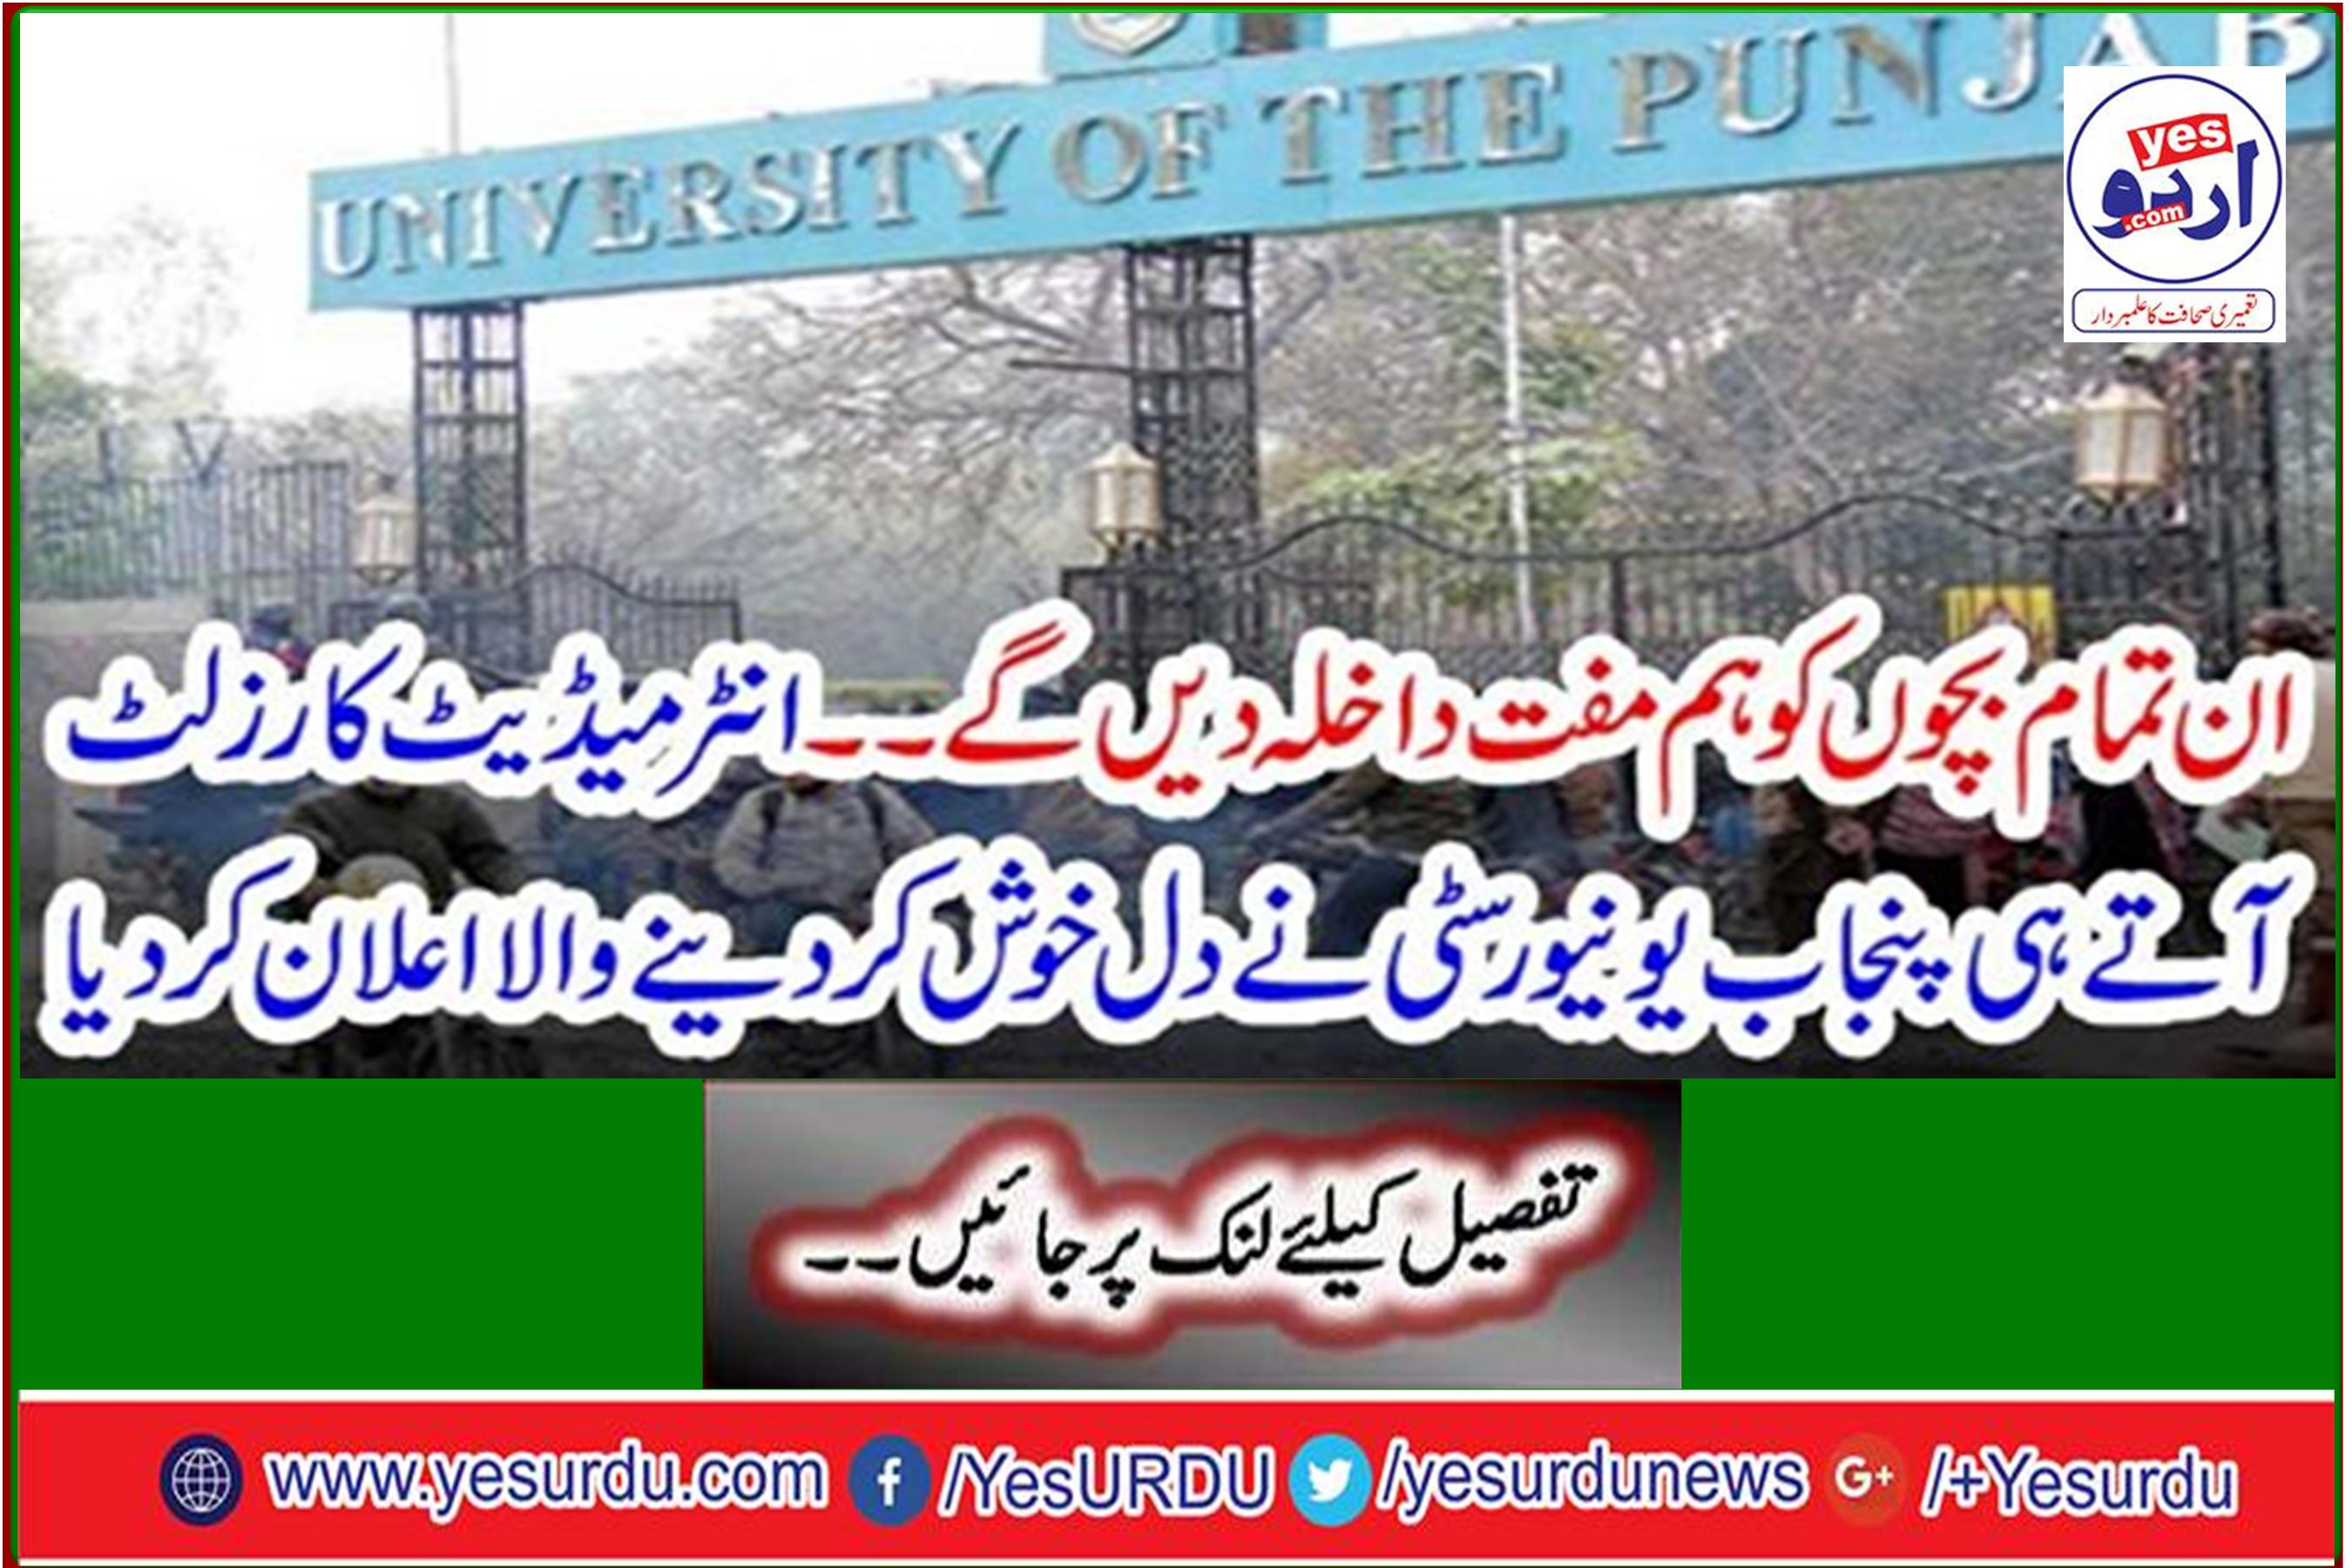 With the arrival of the Intermediate Result, the University of Punjab announced a heartwarming announcement